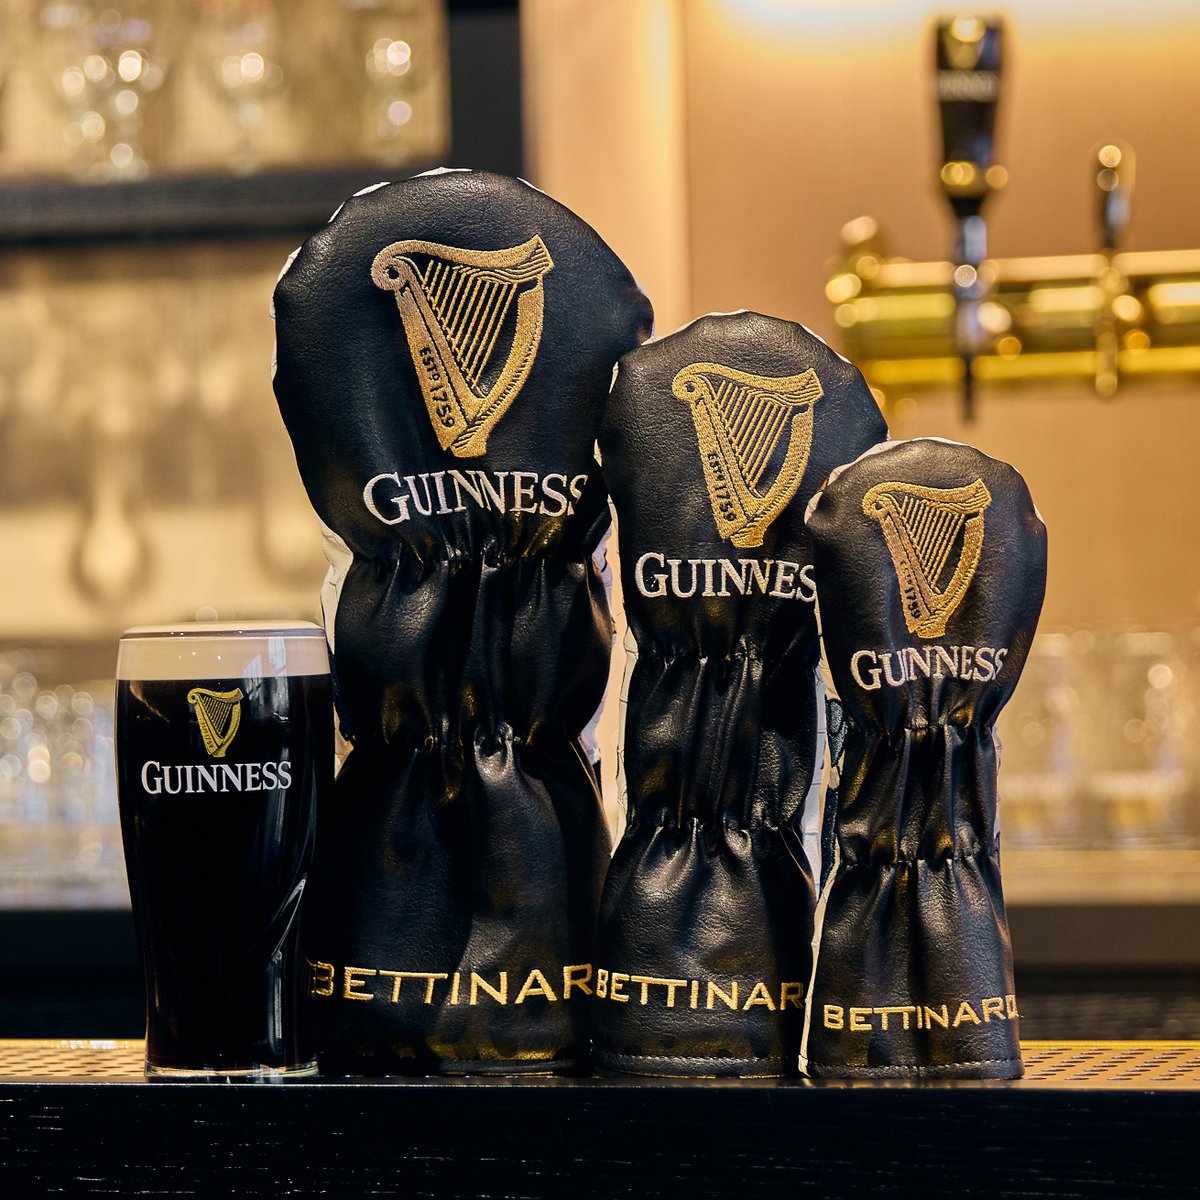 Good things come to those who wait – presenting Guinness x Bettinardi. This collection of headcovers, metal, and more features the most famous icons from our brands coming together for a pint of perfectly poured Guinness. Launching in THE HIVE™ online on Tuesday at 10 a.m. CT.